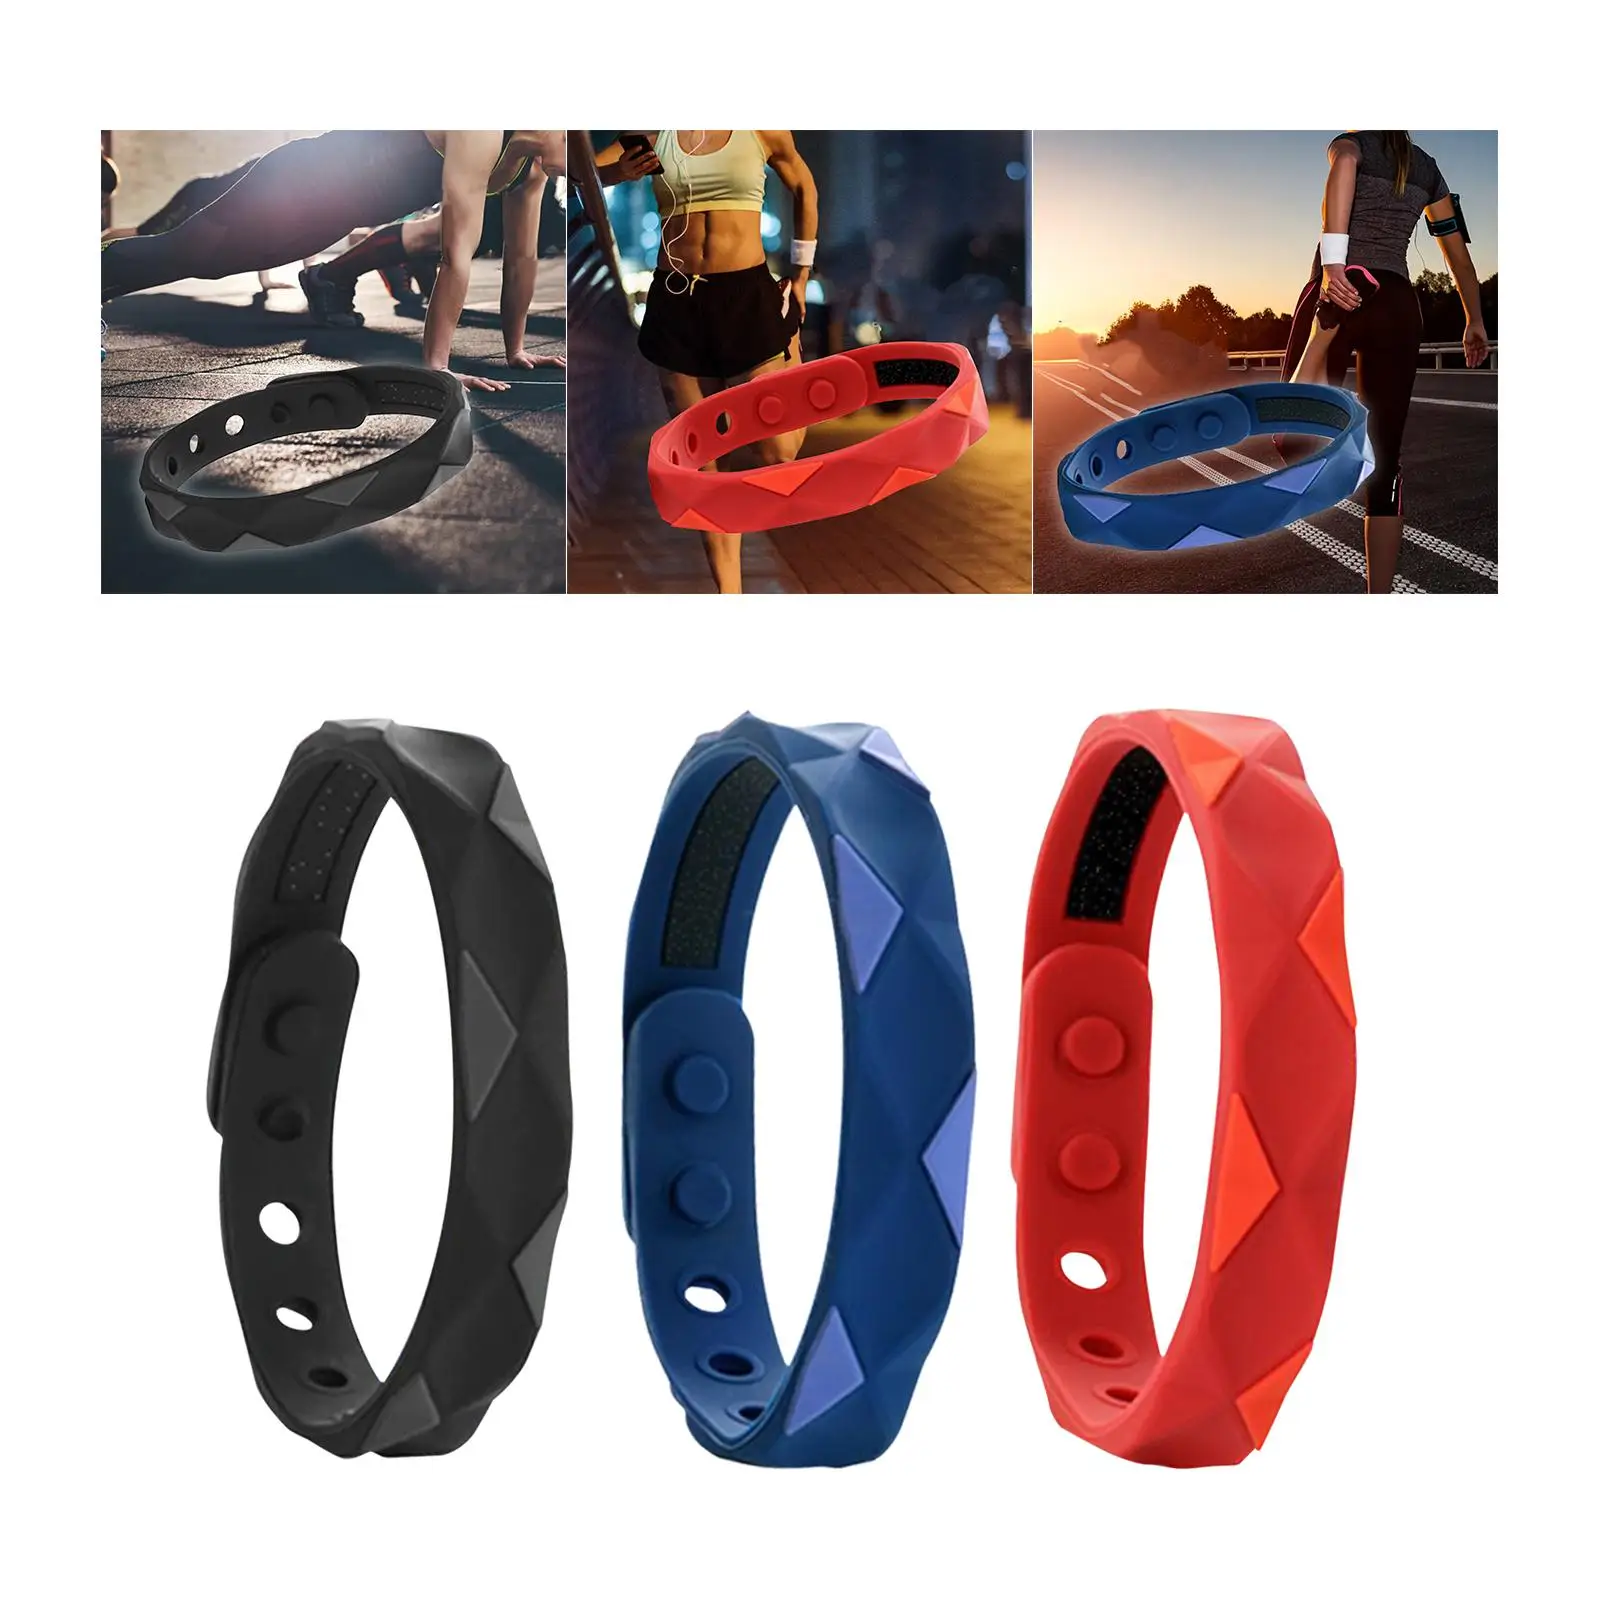 Wristband Anti Static Balance Adjustable Silicone Silica Bracelet for Sports Indoor Outdoor Jogging Yoga